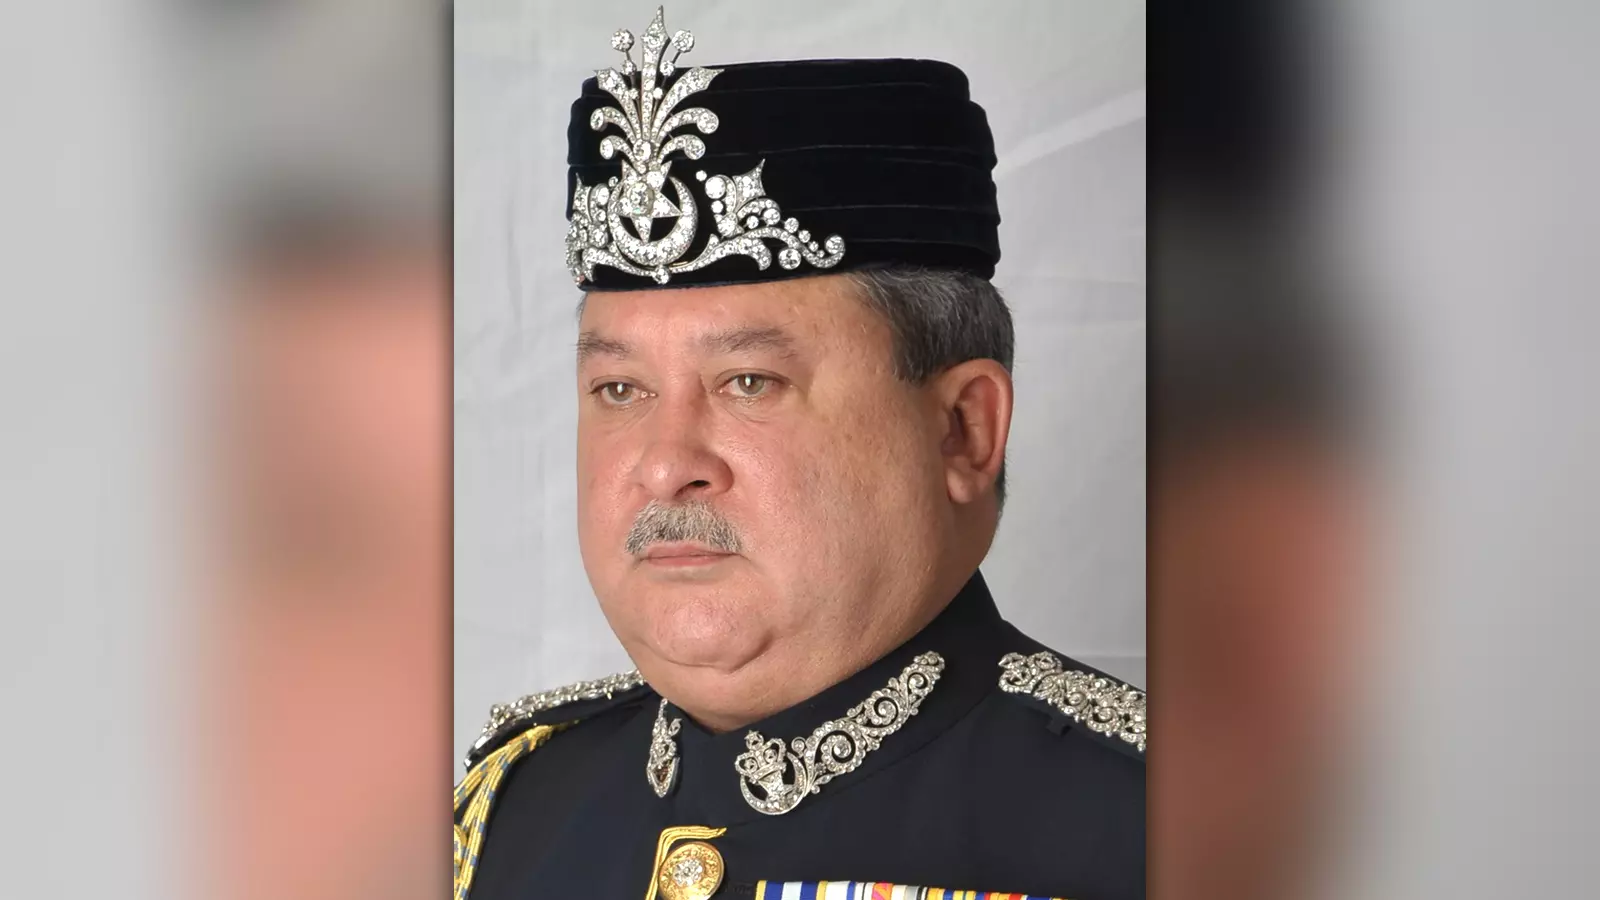 Billionaire Sultan Ibrahim sworn in as Malaysias 17th king under rotating monarchy system